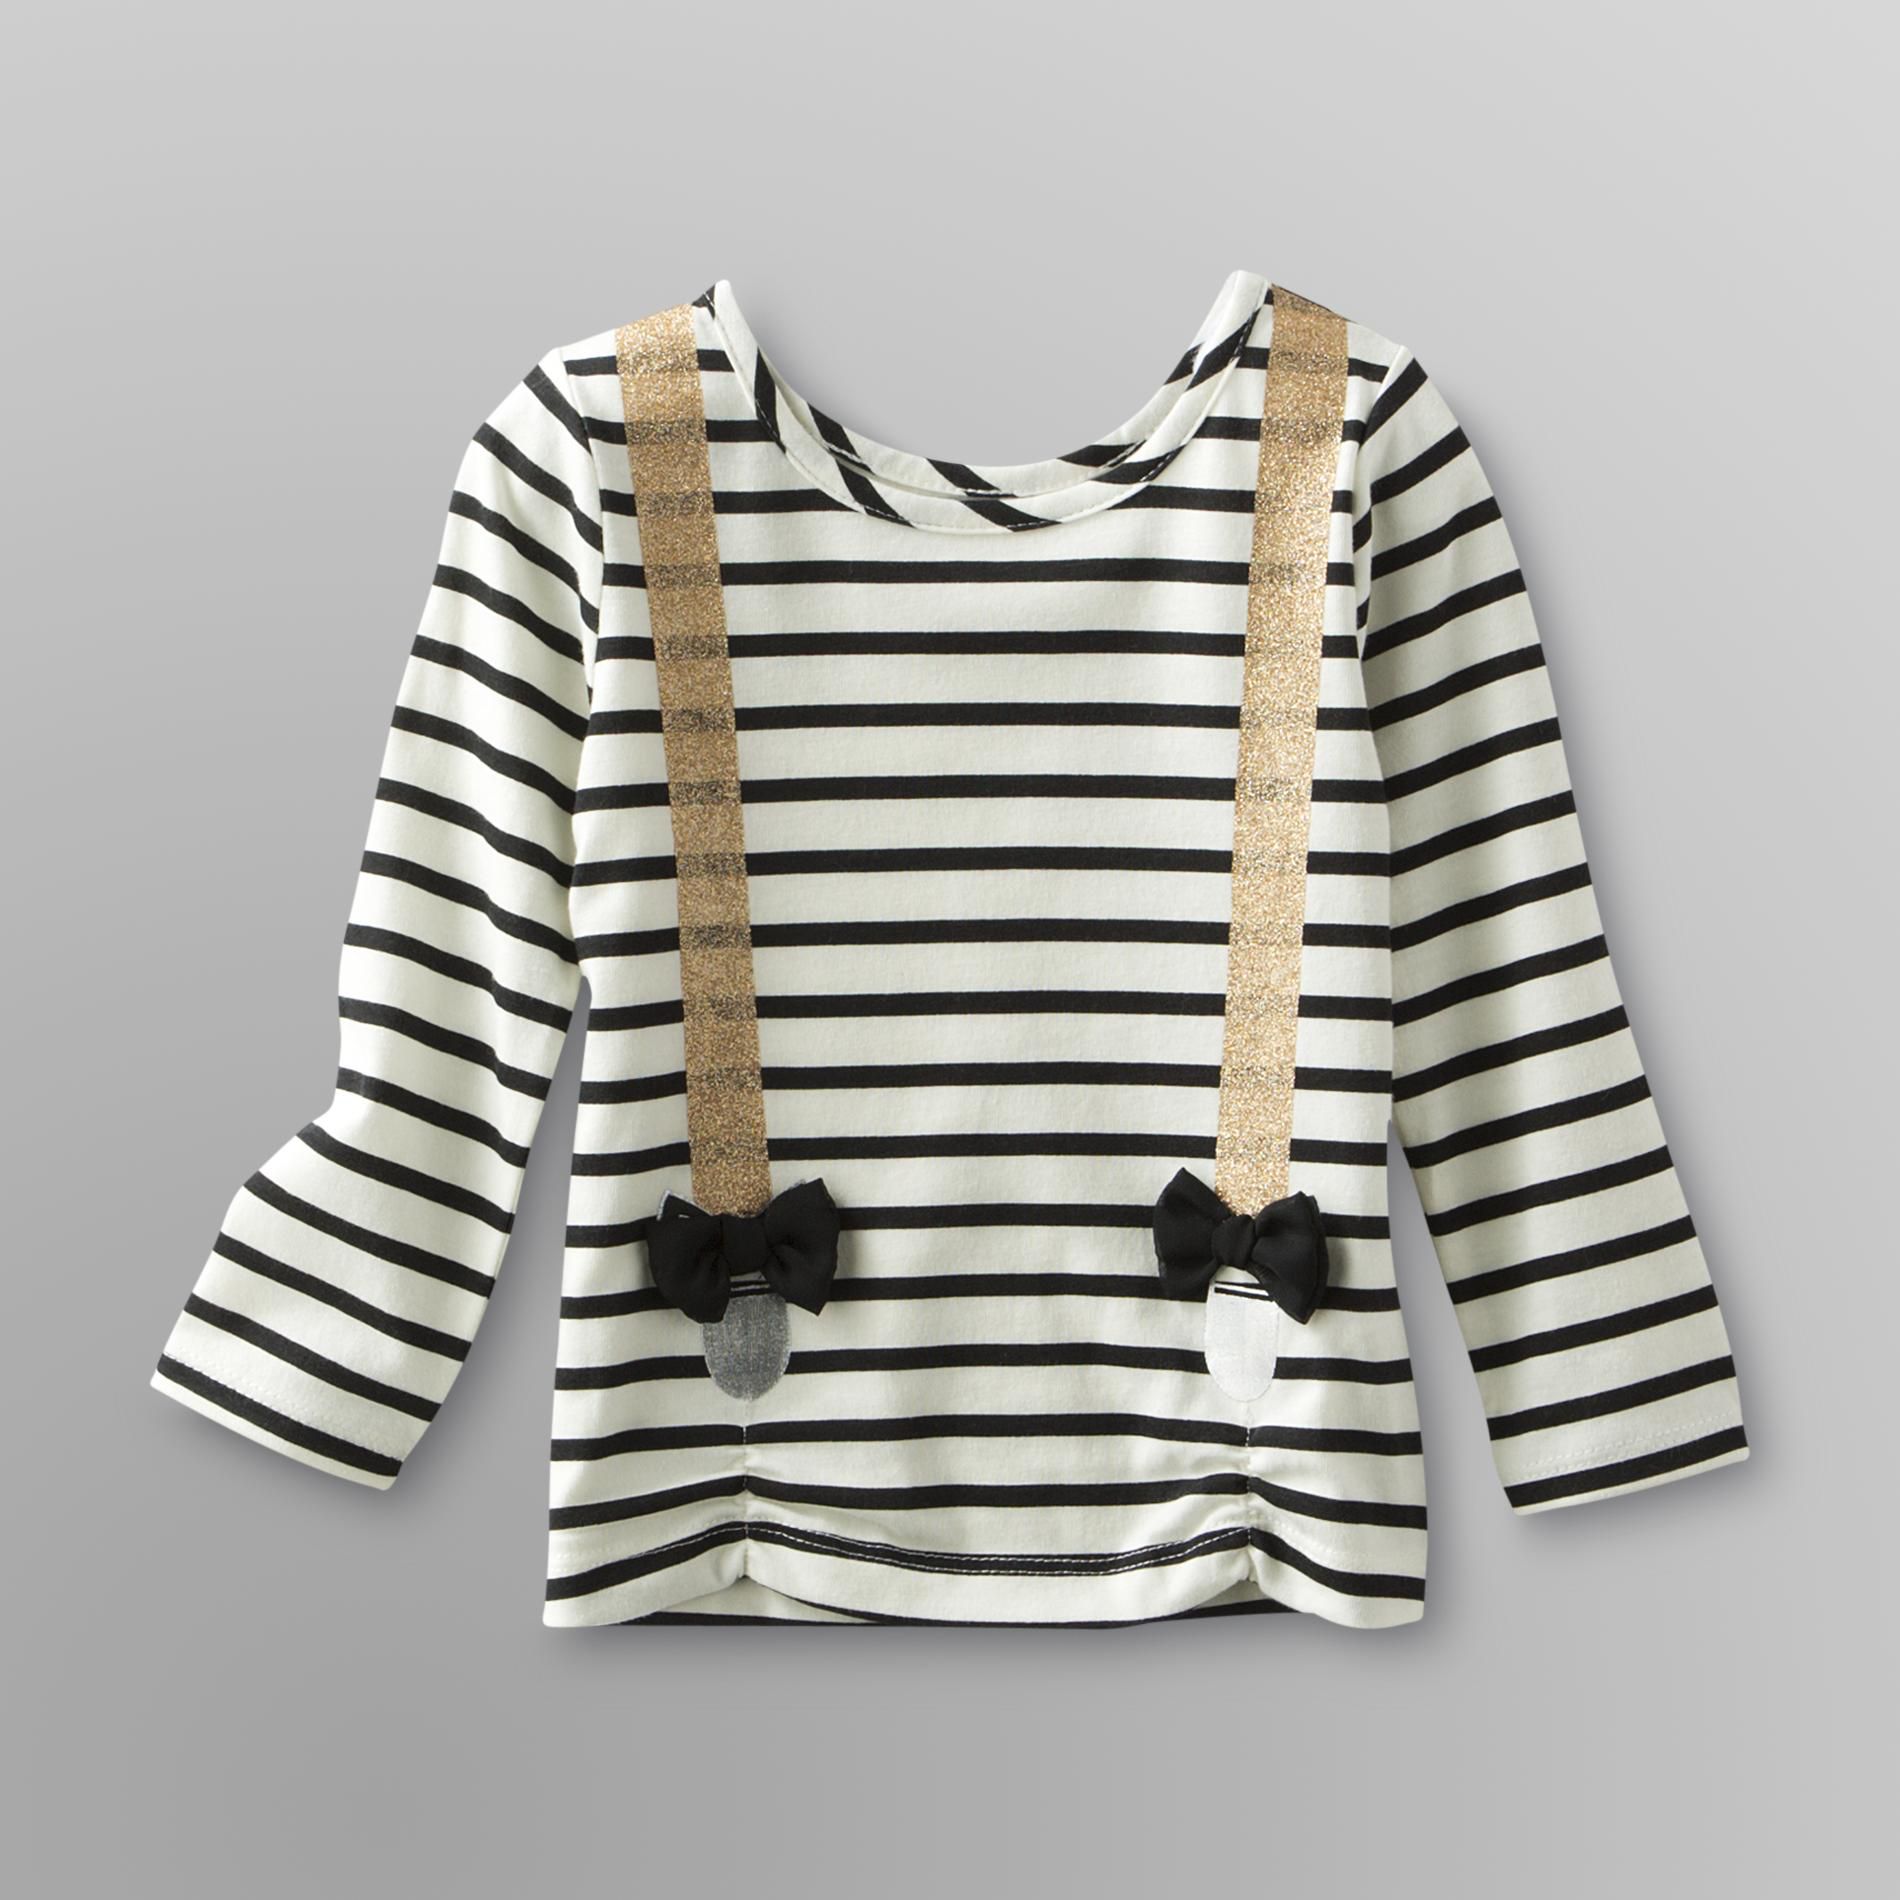 Piper Baby Infant & Toddler Girl's Striped Top - Faux Suspenders